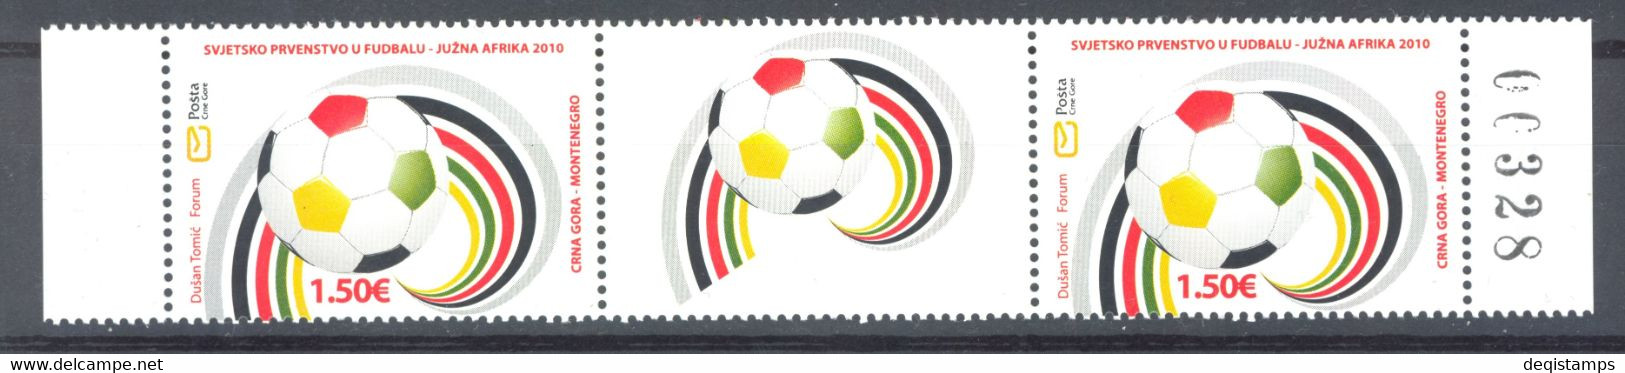 Montenegro 2010 ☀ World Cup Football Championship, South Africa Set ☀ MNH** - 2010 – South Africa